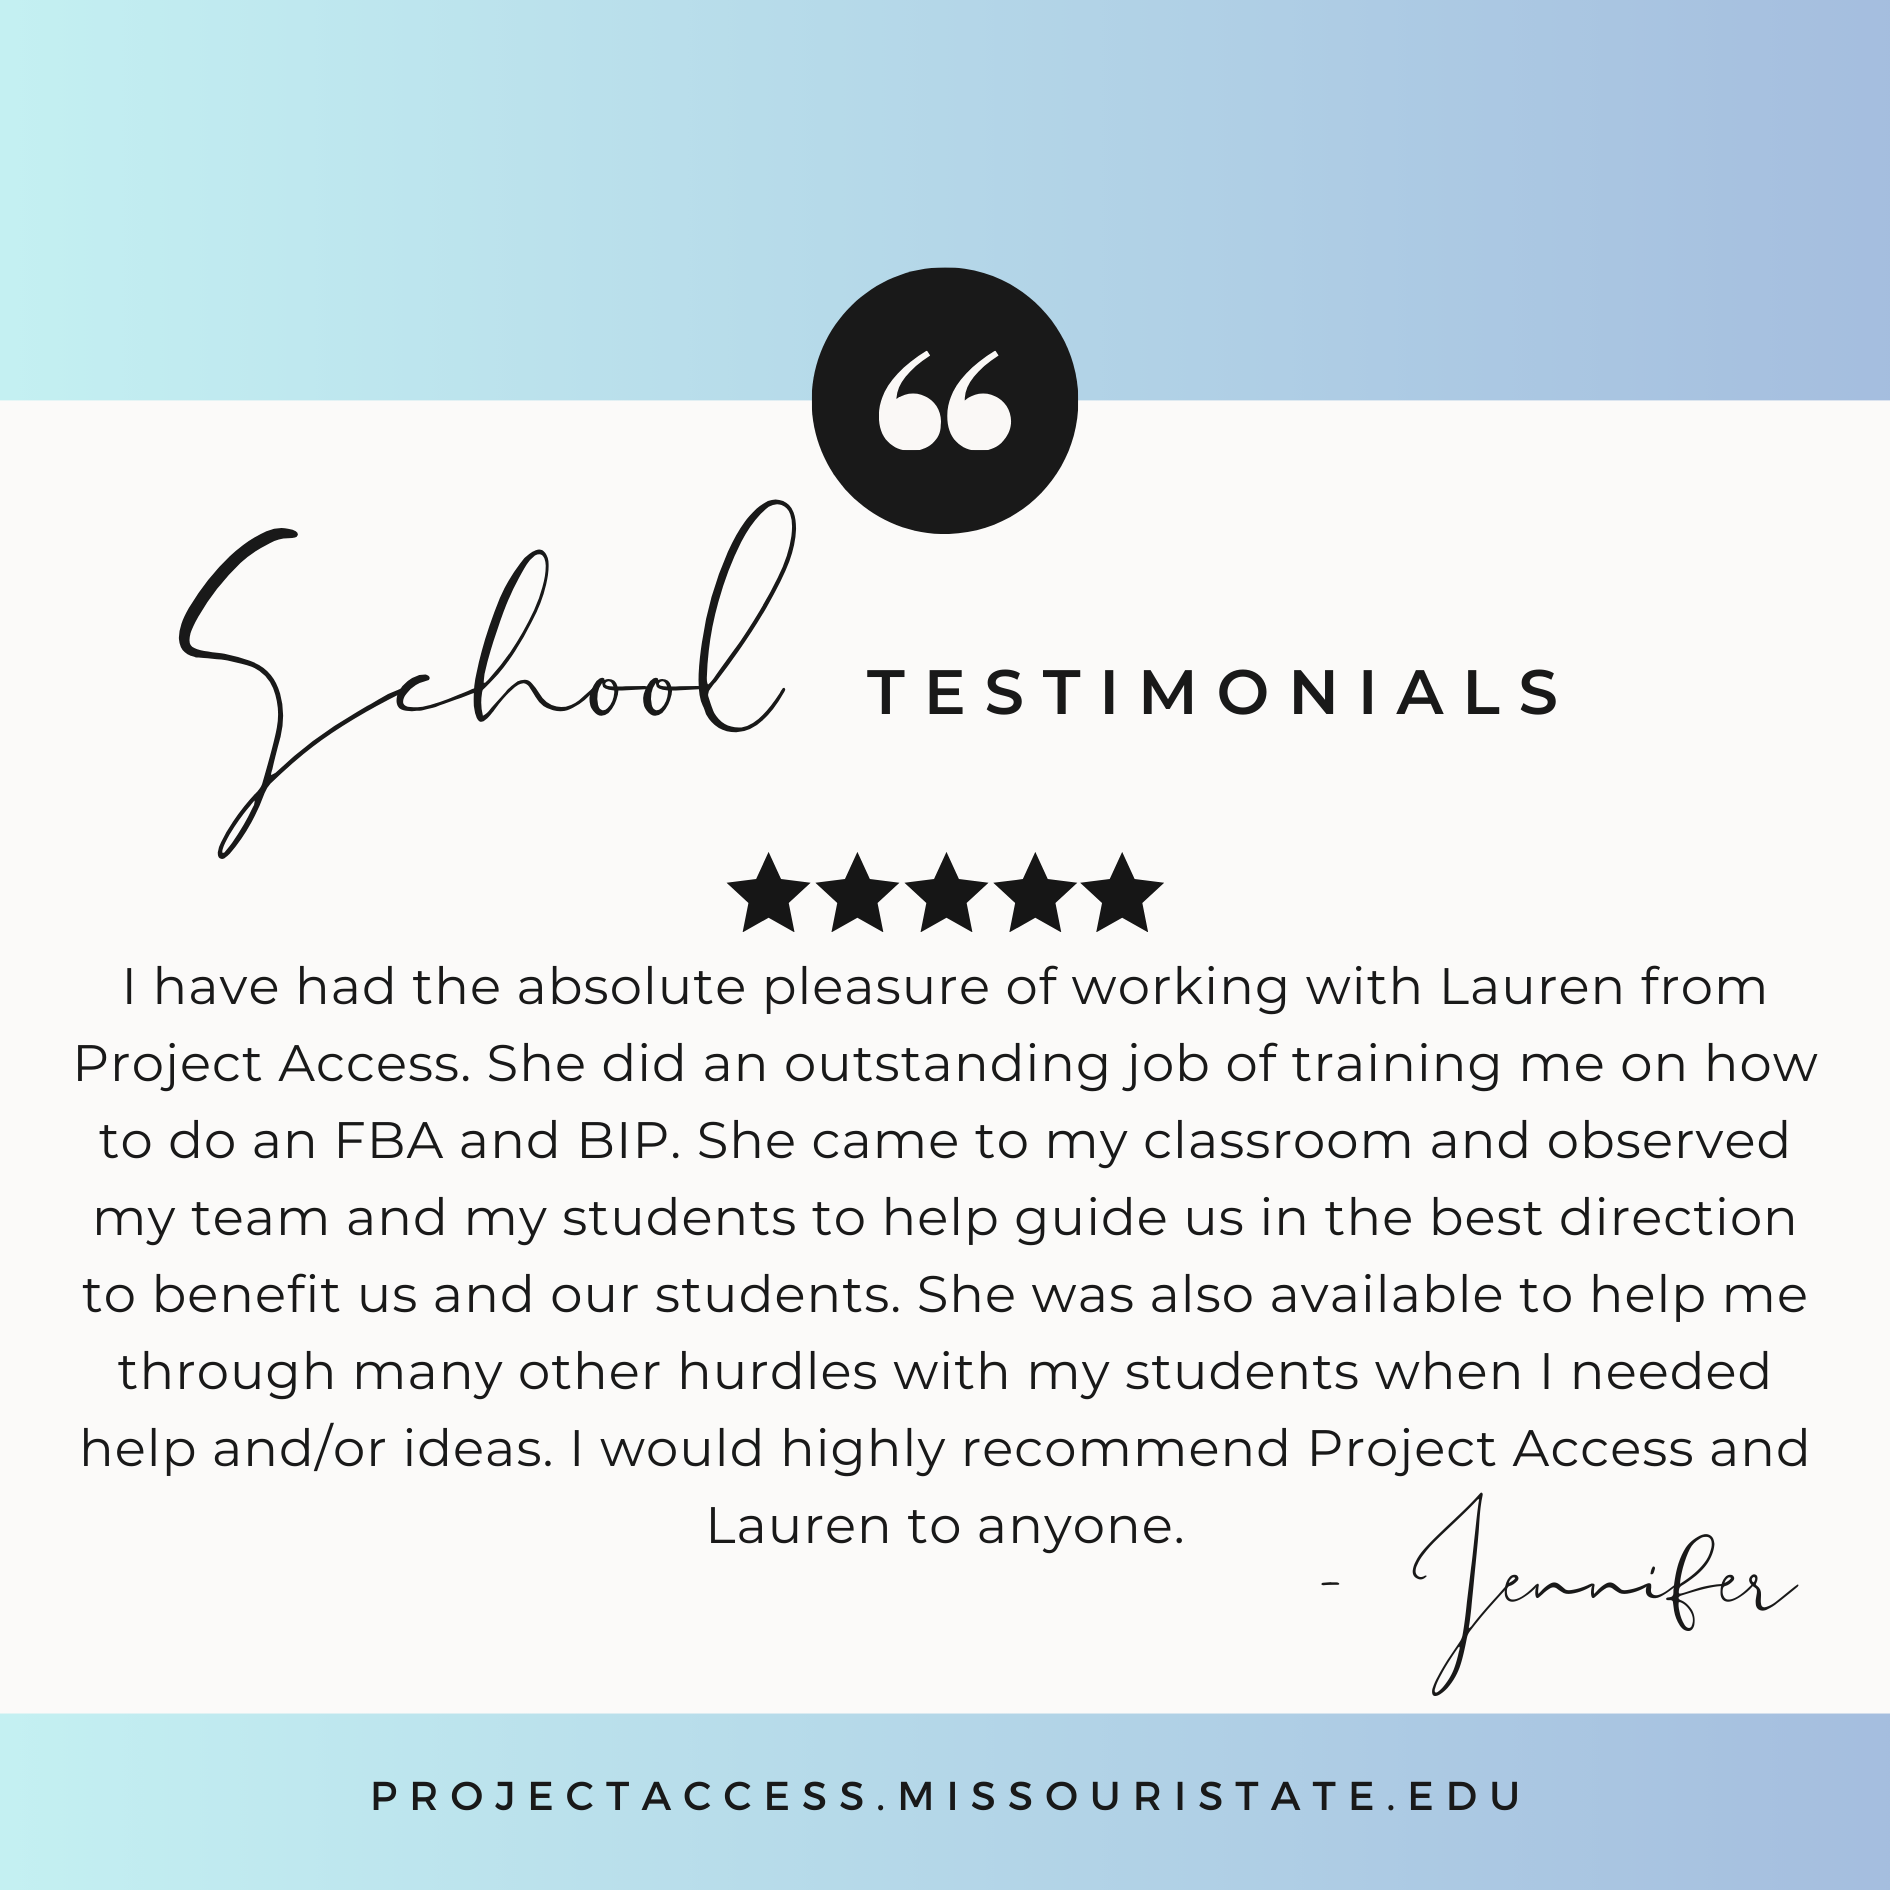 A positive school testimonial about completing the FBA process